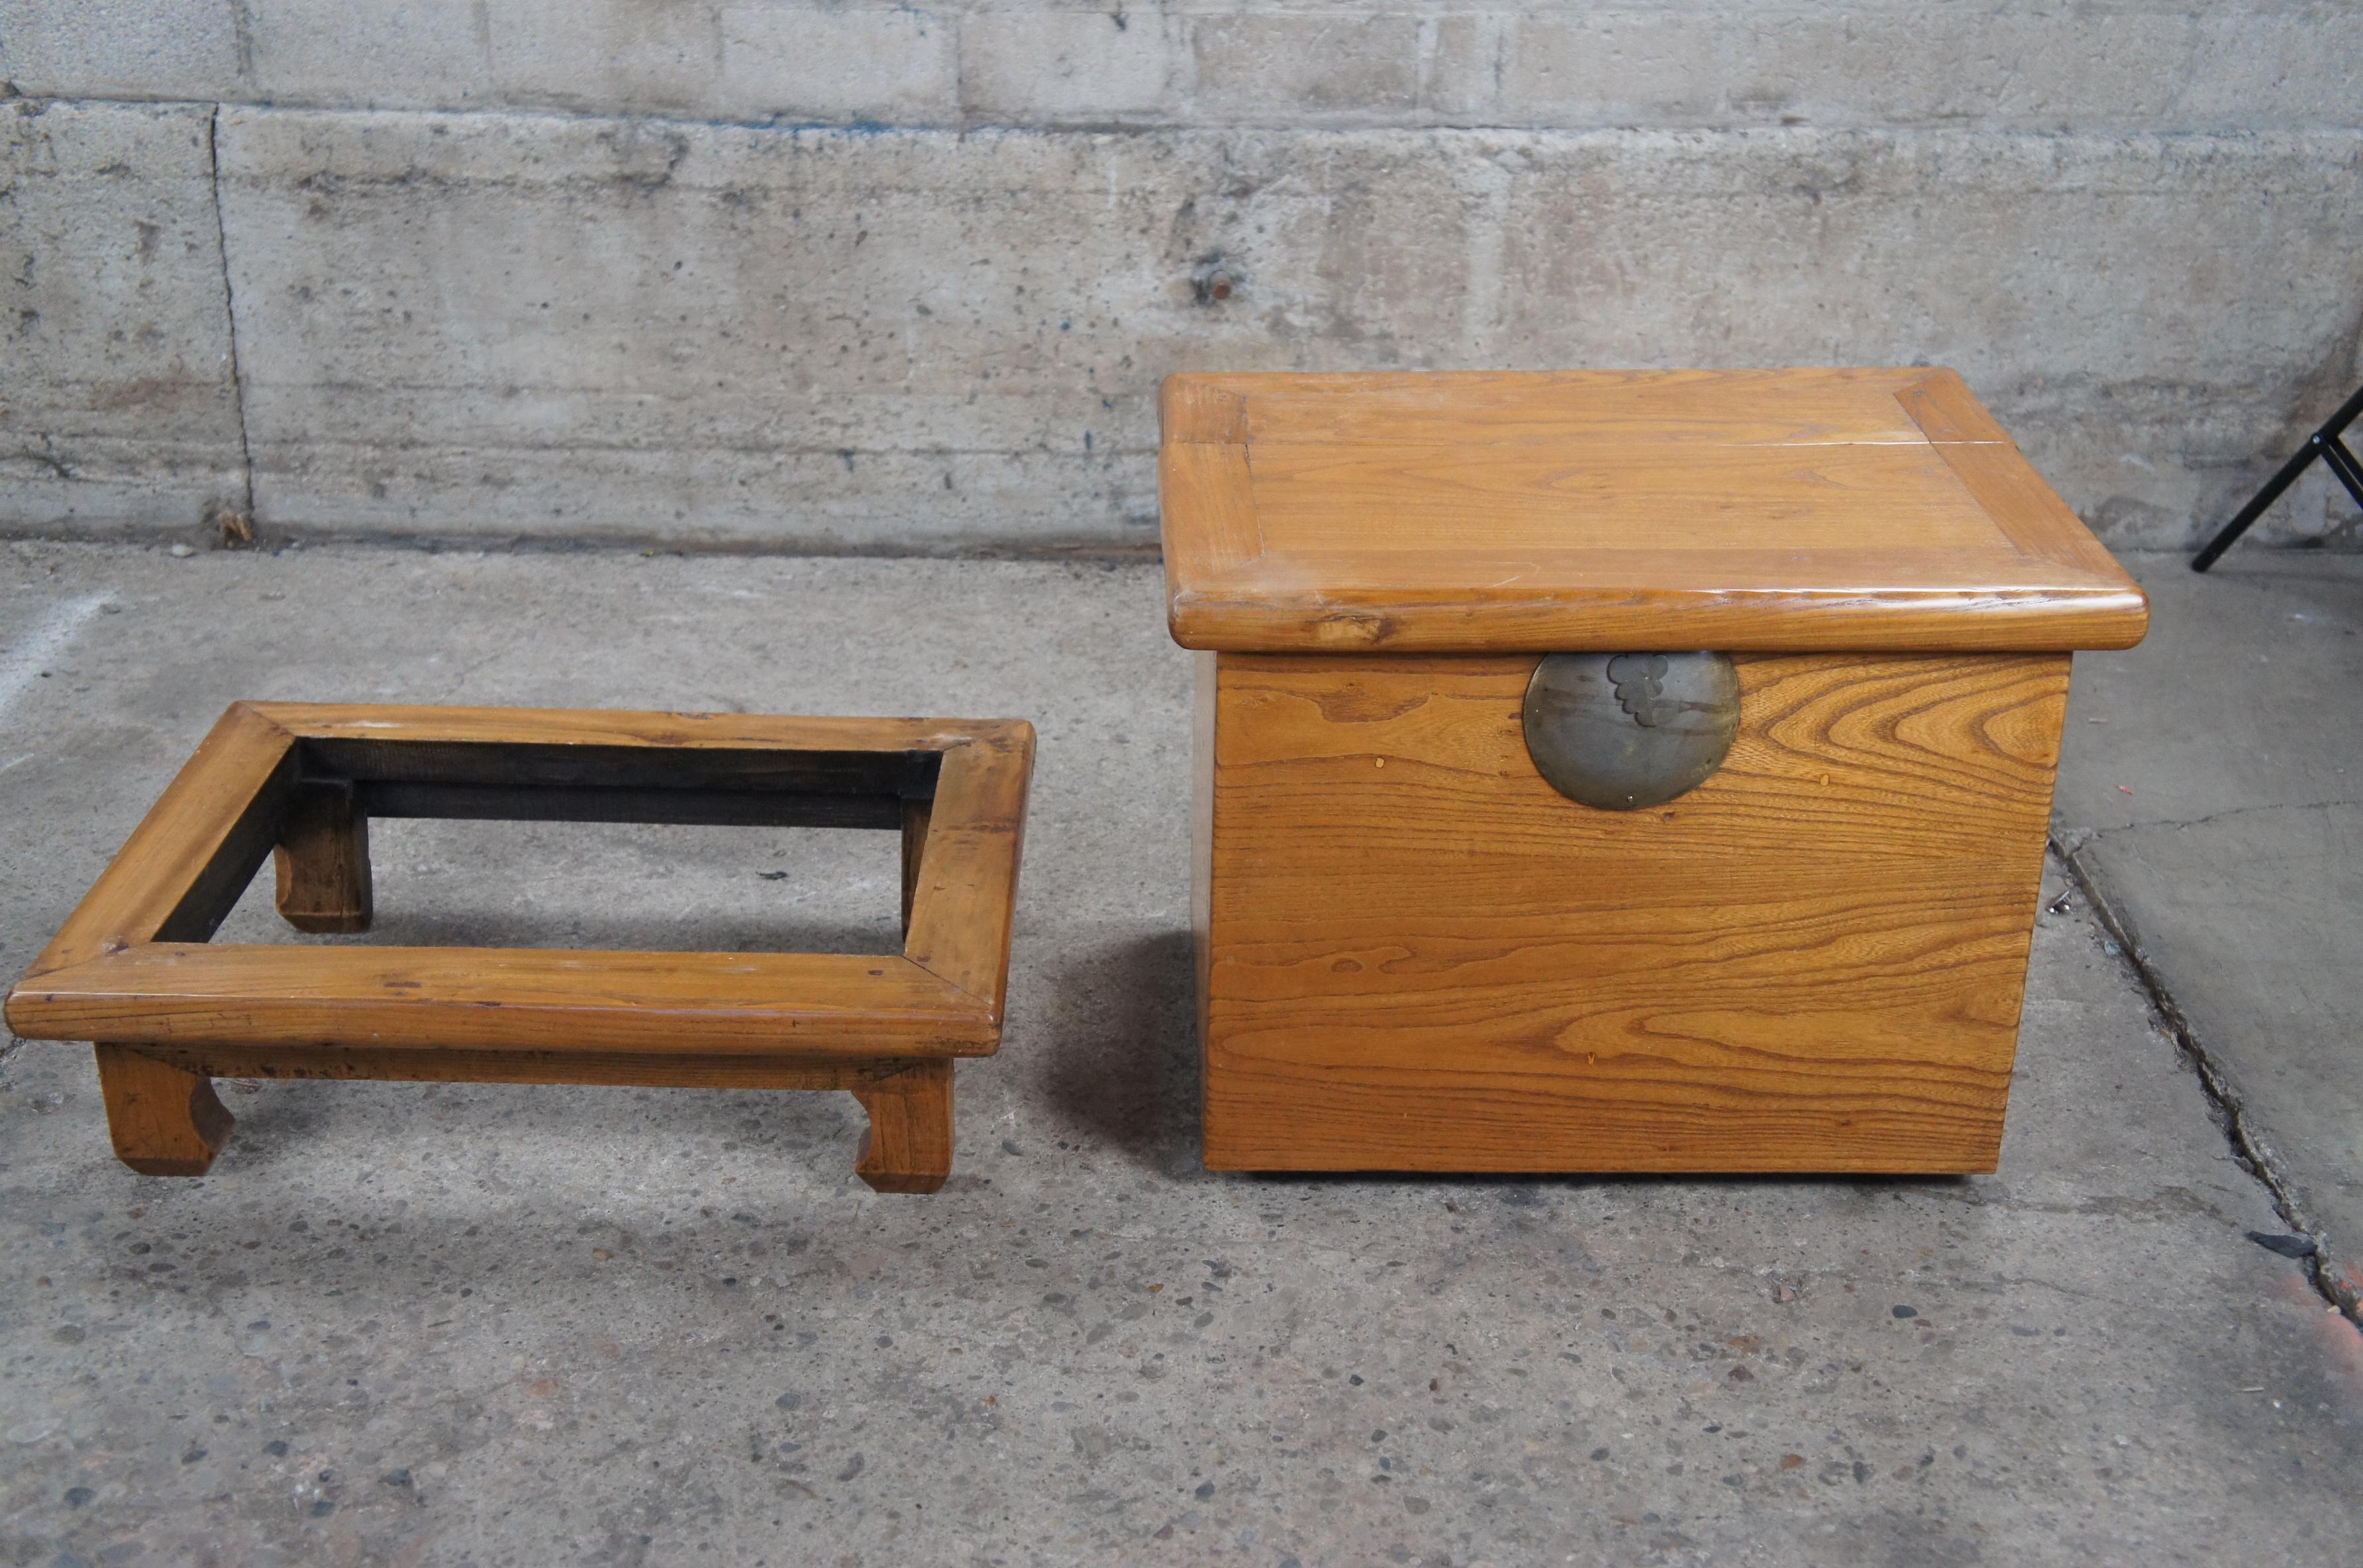 2 Antique 18th Century Qing Dynasty Shanxi Elm Wood Storage Chests Trunks Pair For Sale 5